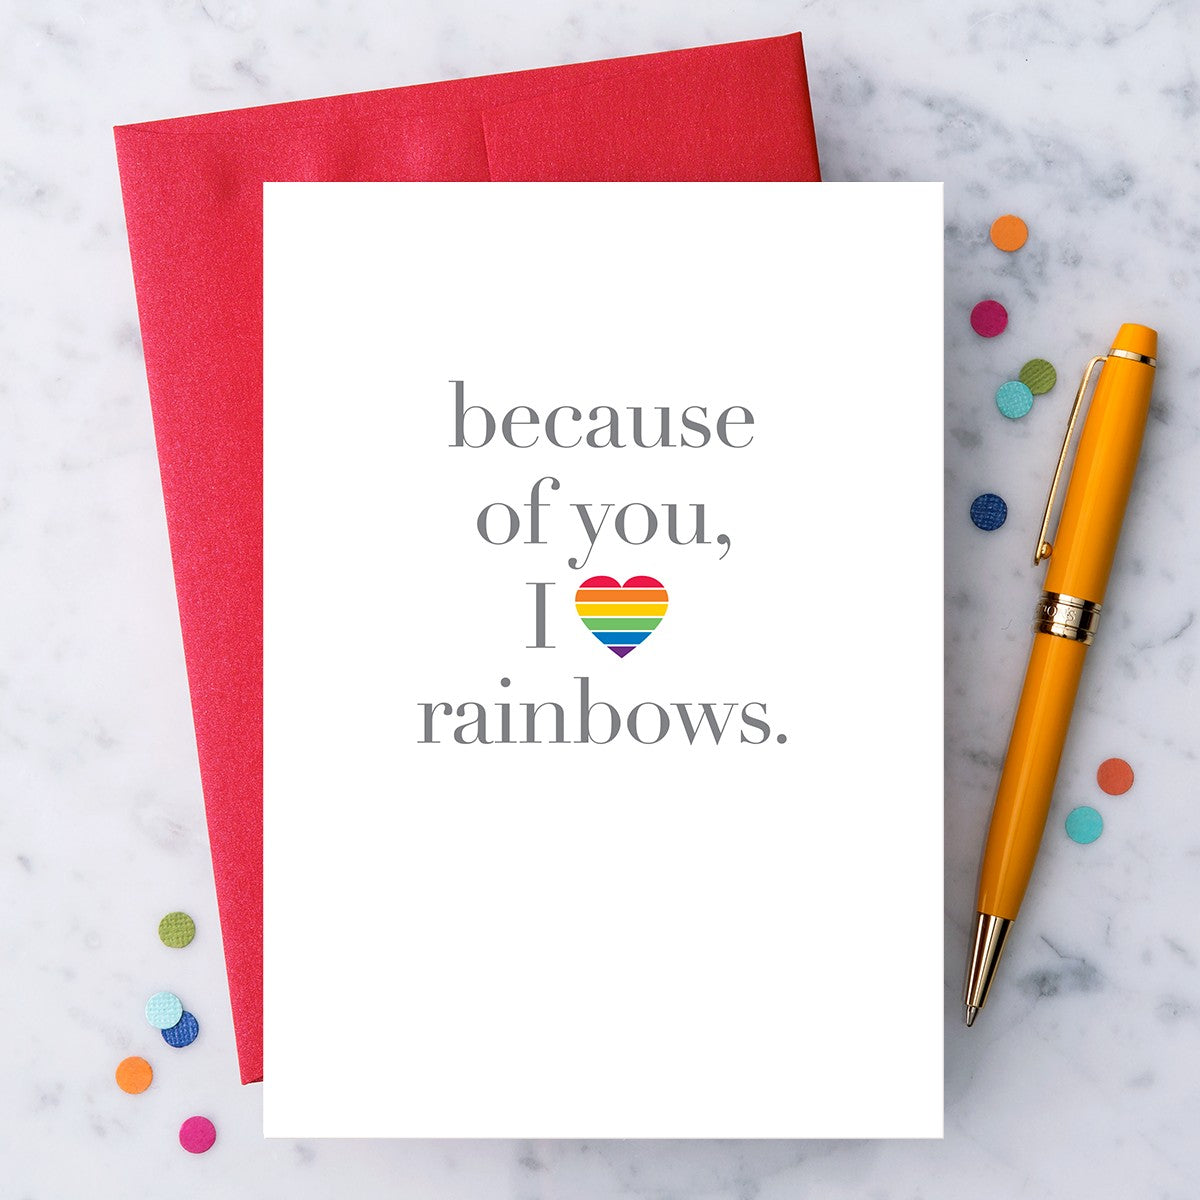 "Because of you, I love rainbows." Greeting Cards The Eco Joynt Greeting & Note Cards